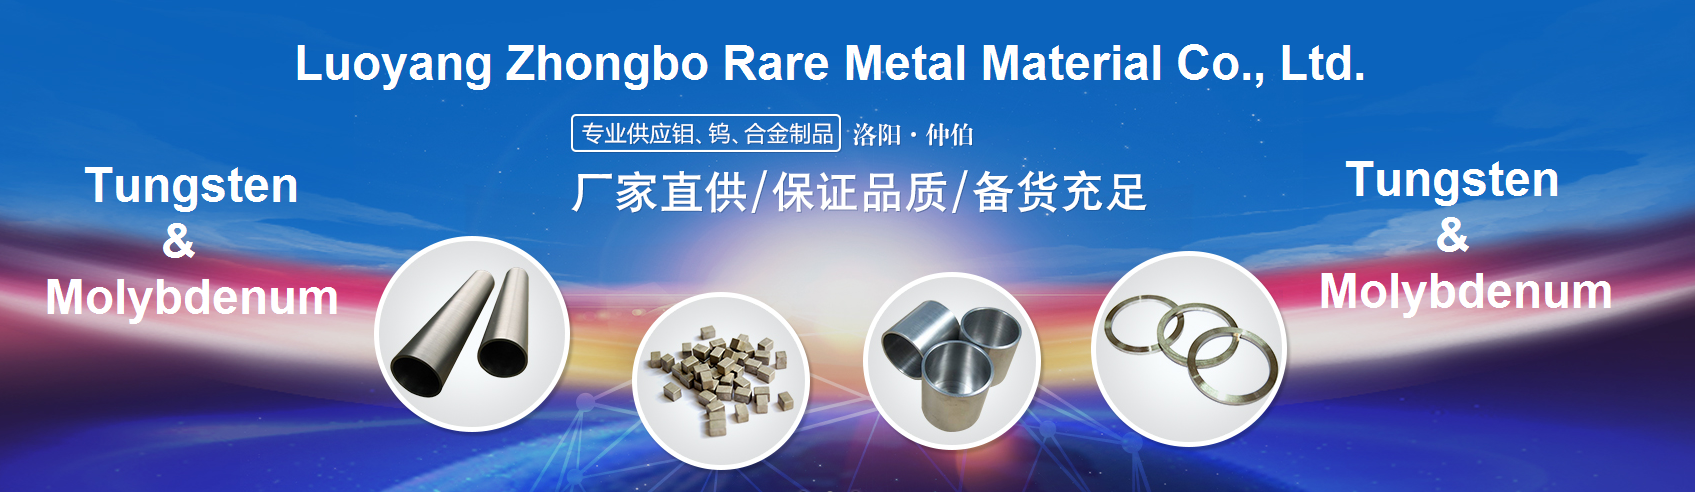 Stocks for High purity 0.18mm edm cutting Molybdenum wire